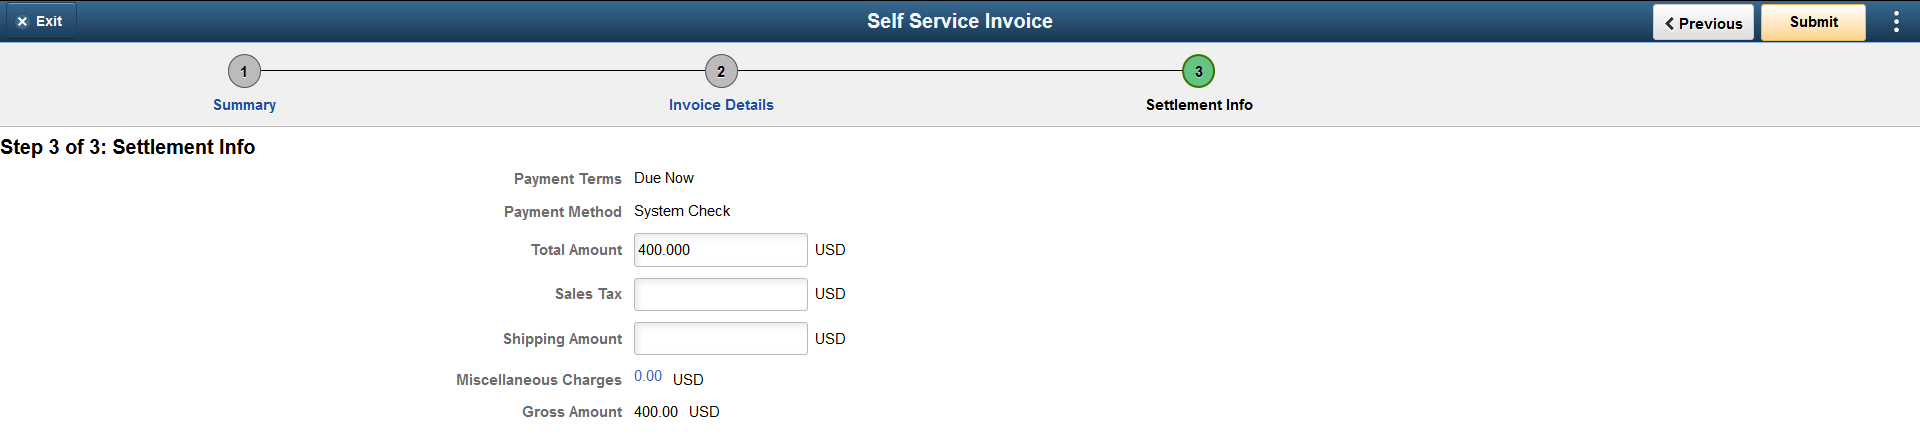 Self Service Invoice - Create Invoice page as displayed on a Desktop ( 3 of 3)